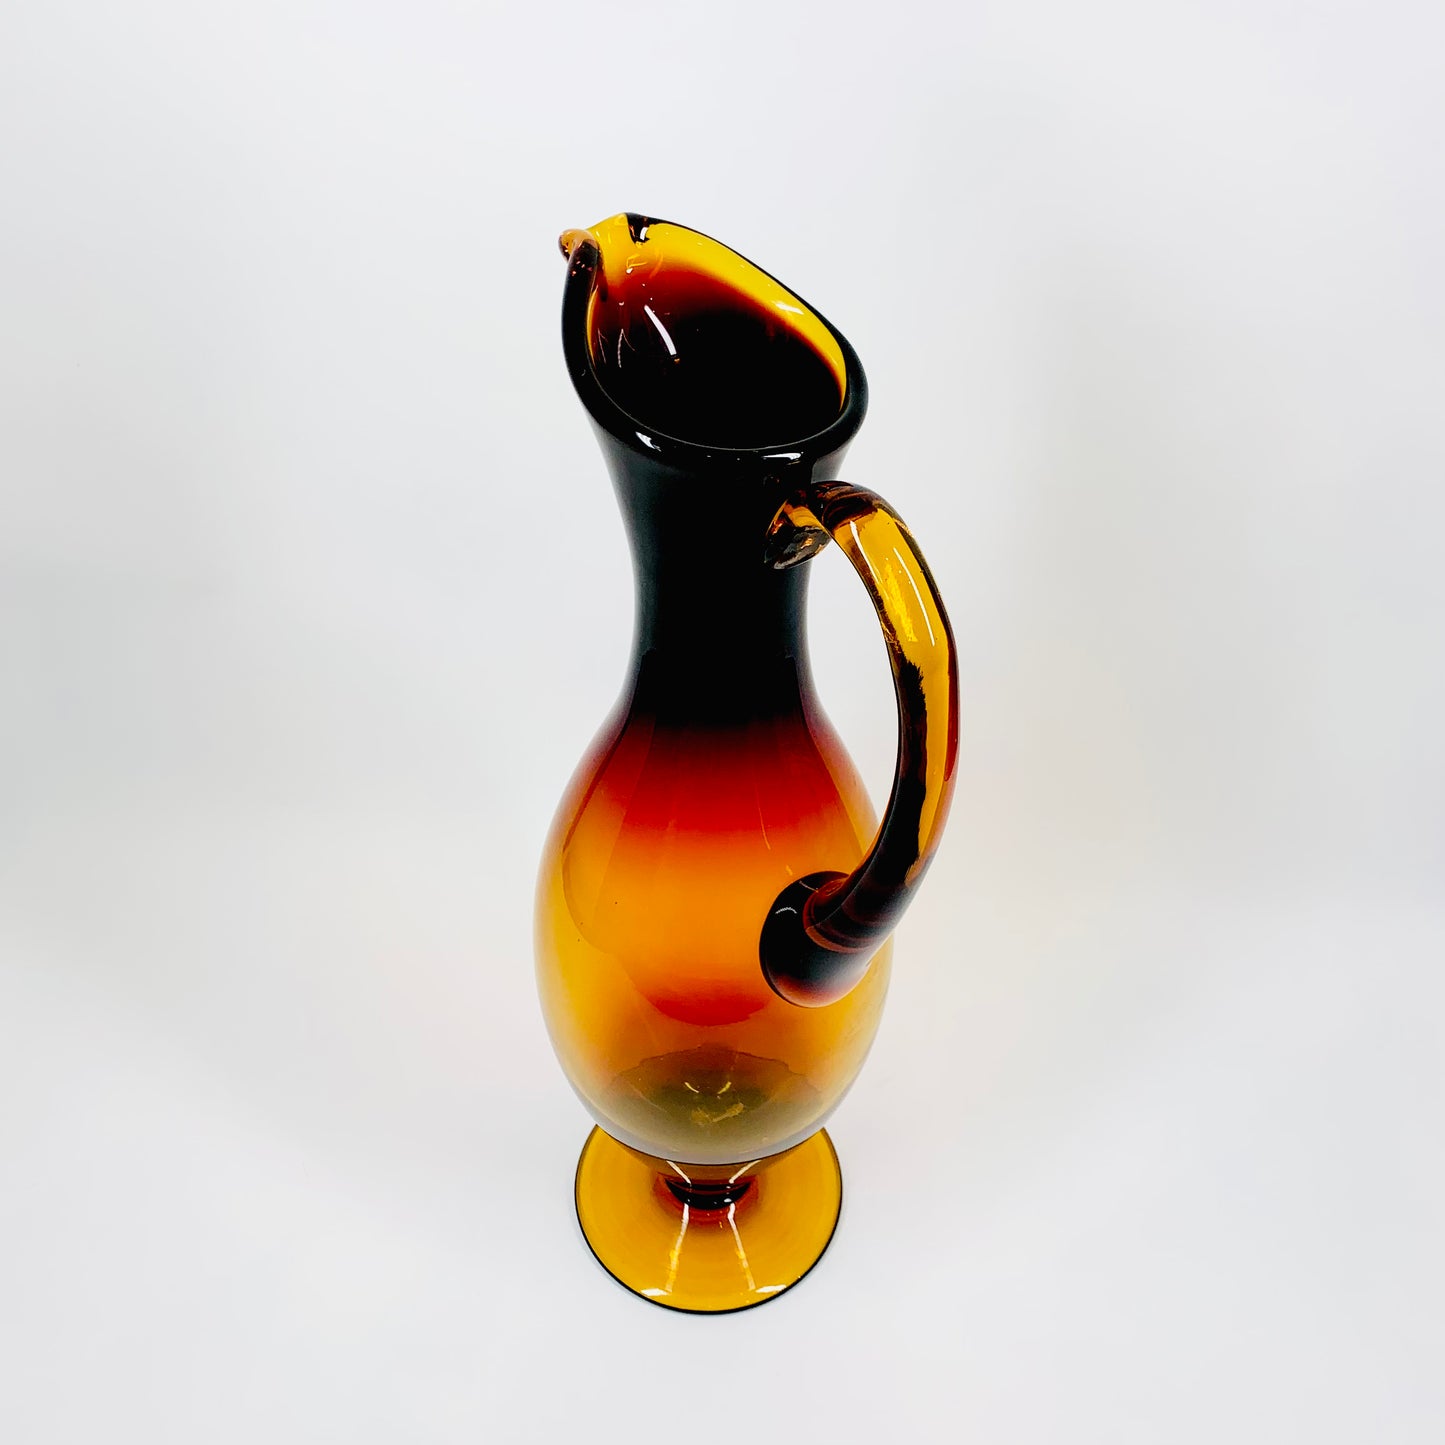 Tall Midcentury American Bischoff amberina glass footed jug